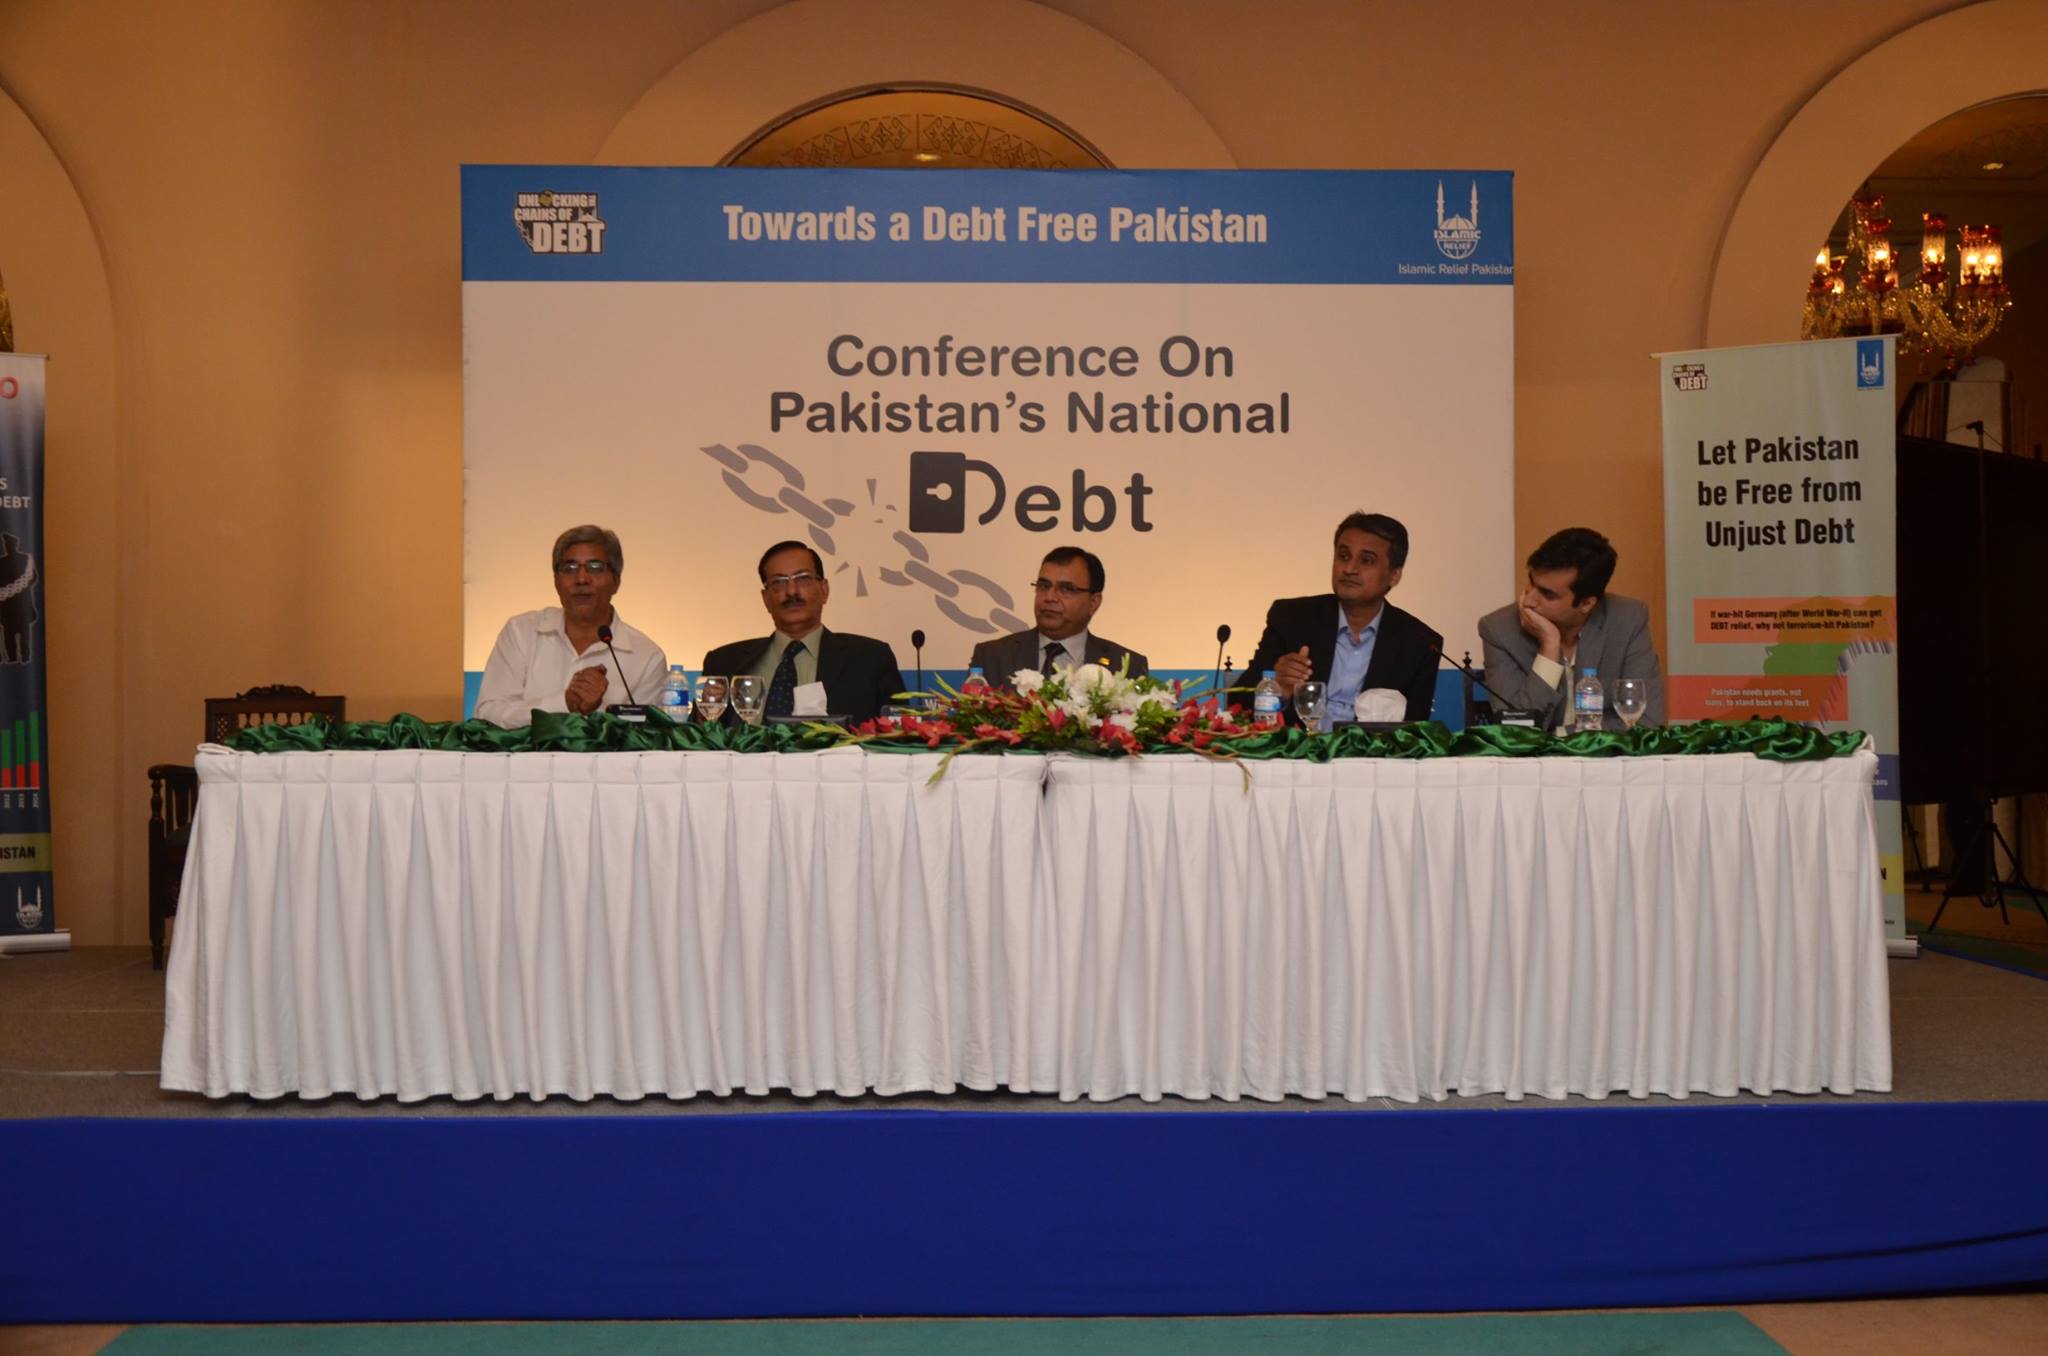 Conference on Pakistan Public Debt, 16 Sept 2015, Islamabad